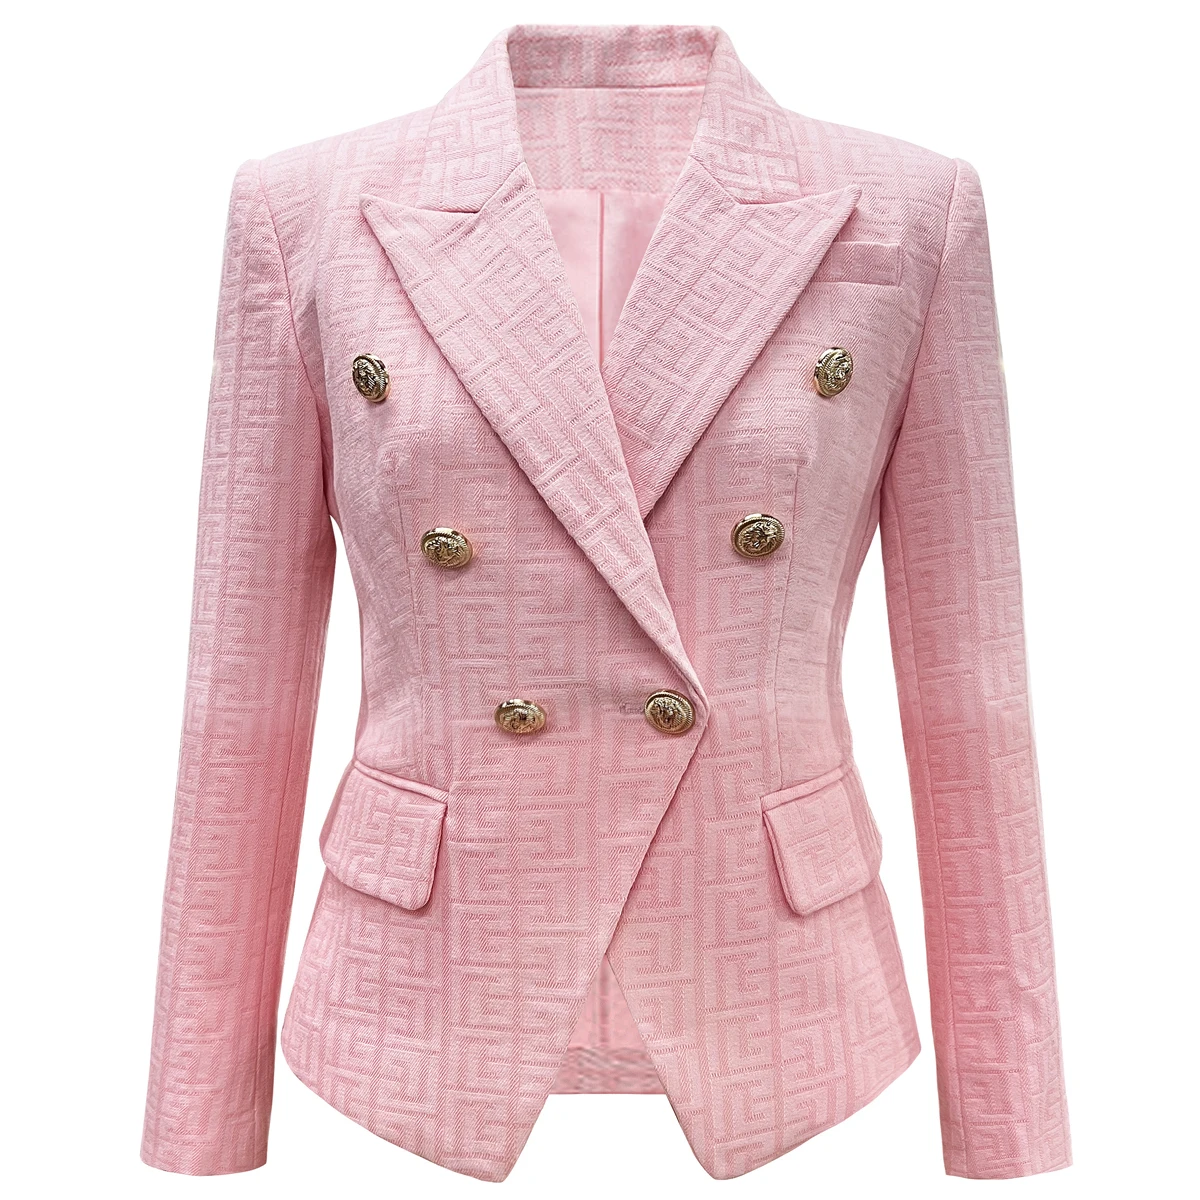 S-5xl Spring And Autumn High Quality New Product Slim Fit Woven Pattern Top Women's Suit Jacket Blazers